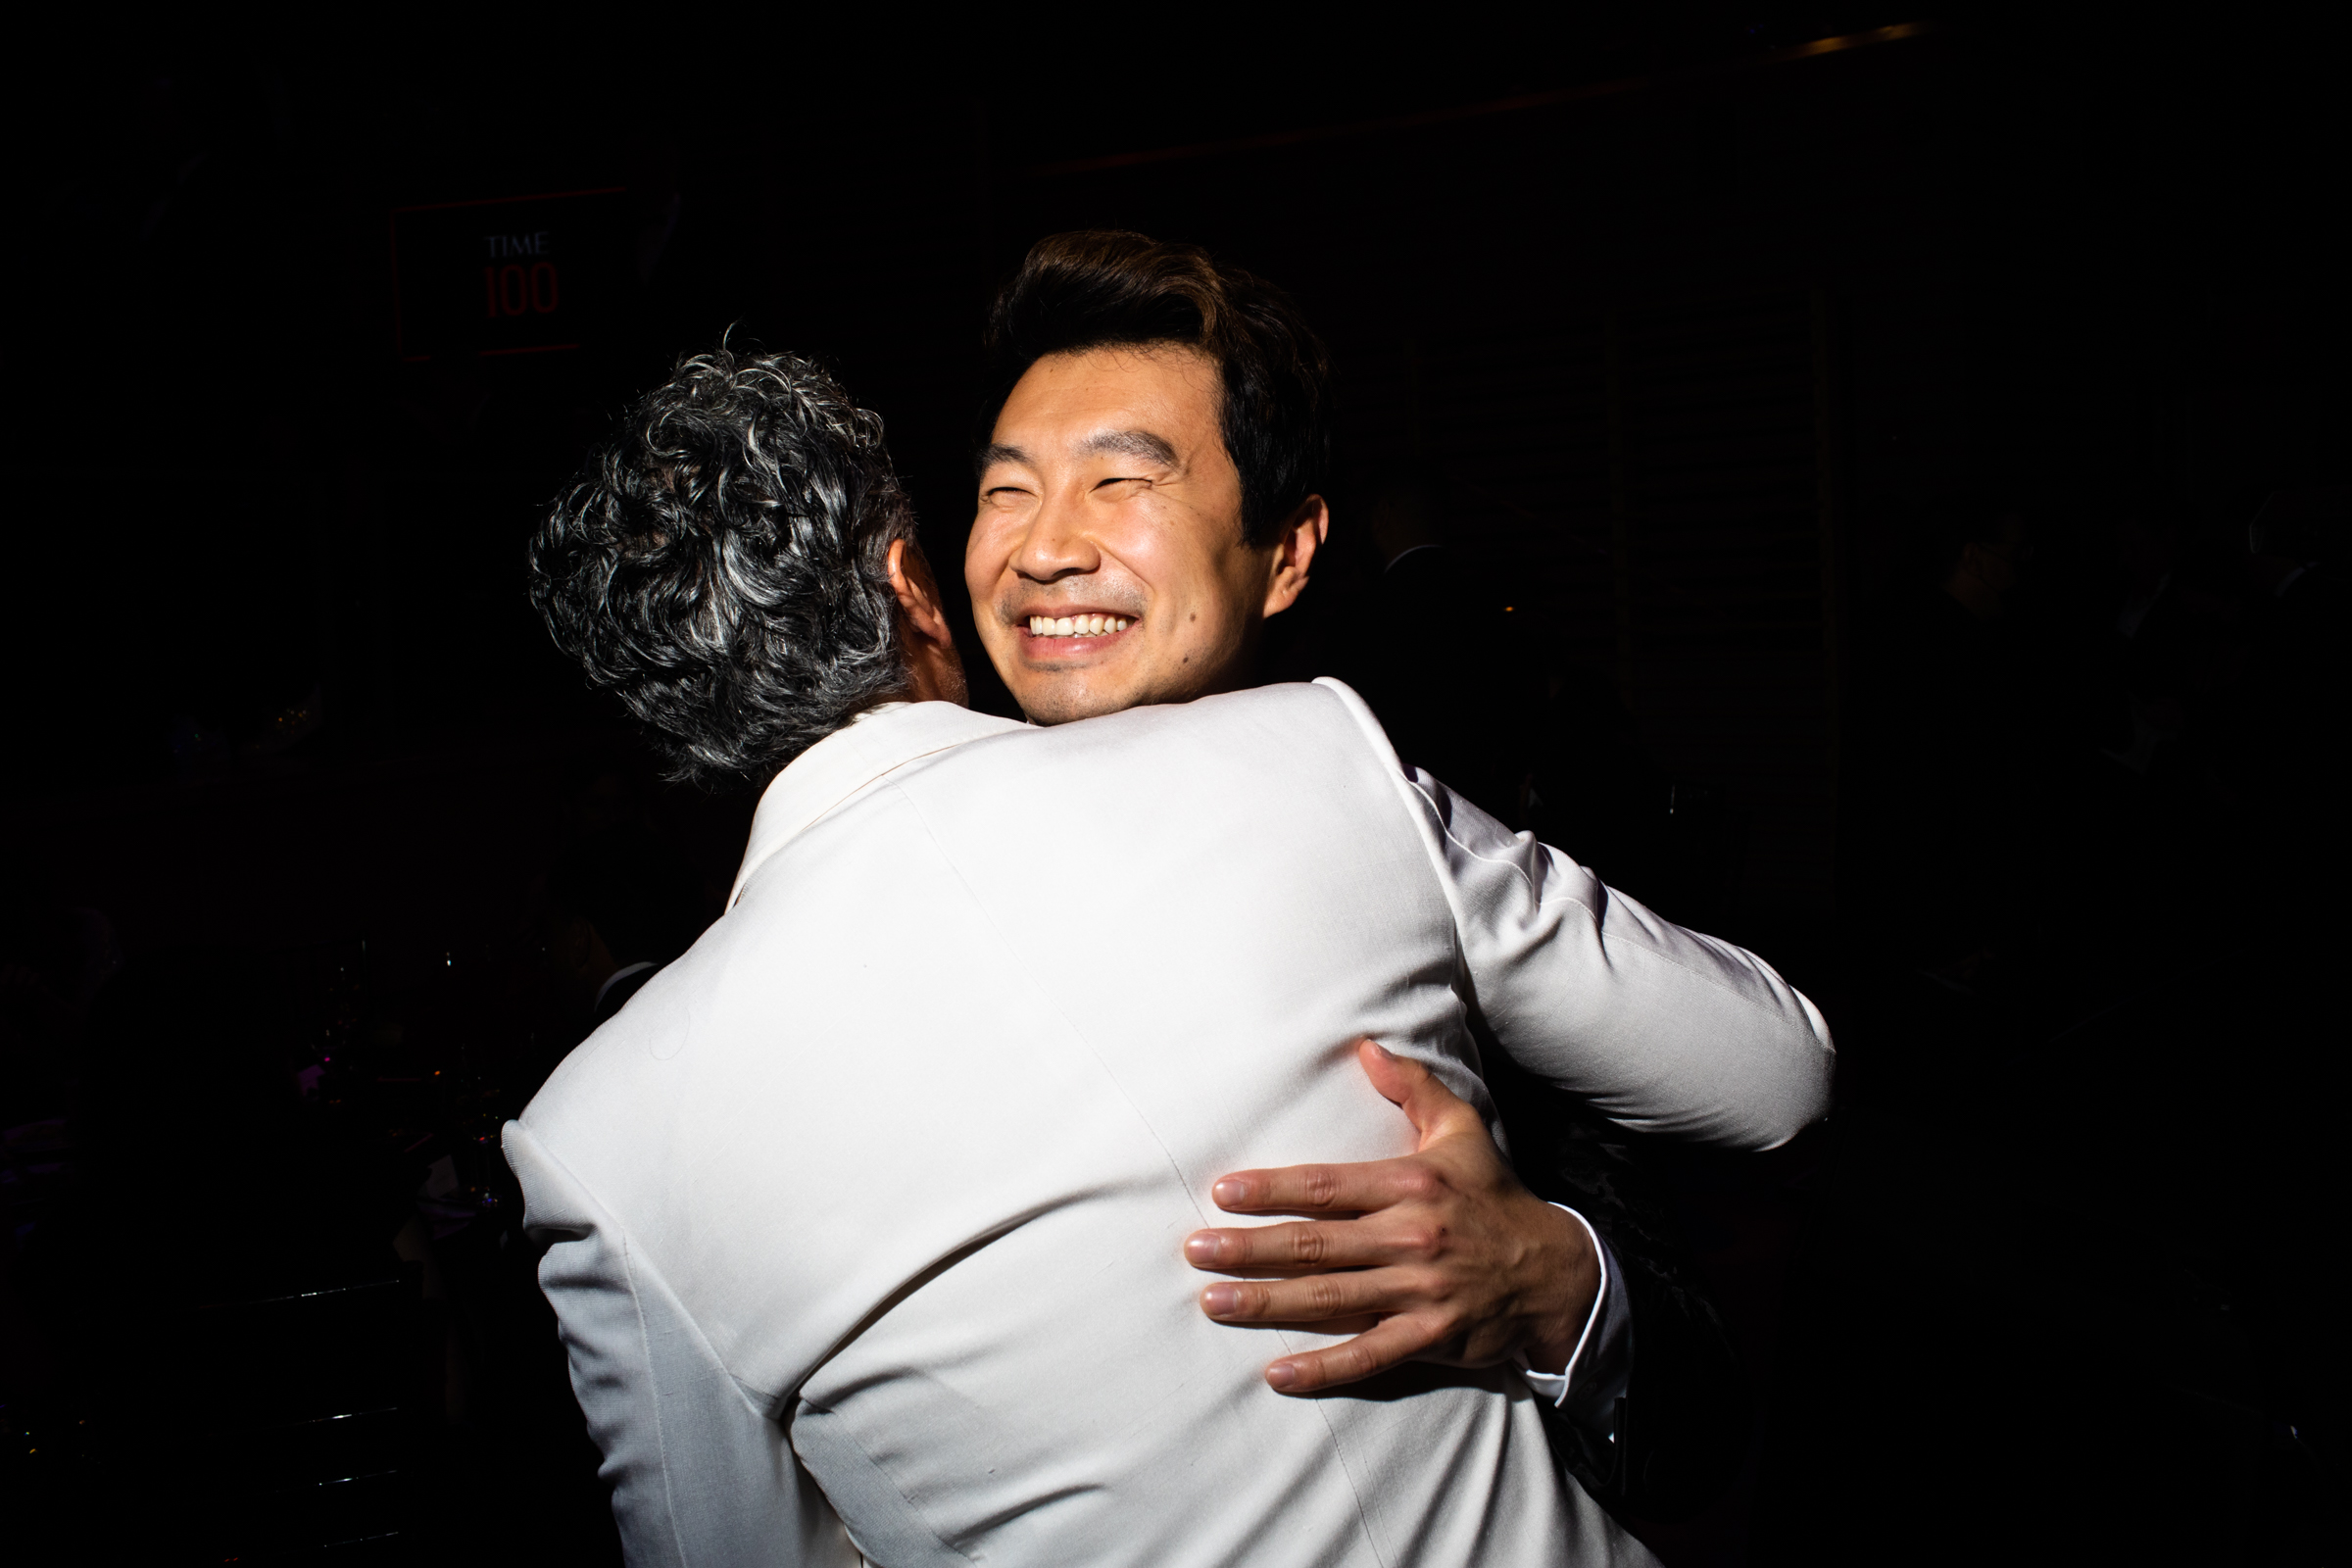 Taika Waititi and Simu Liu embrace at the TIME 100 Gala at Jazz at Lincoln Center in New York City, on June 8, 2022. (Landon Nordeman for TIME)